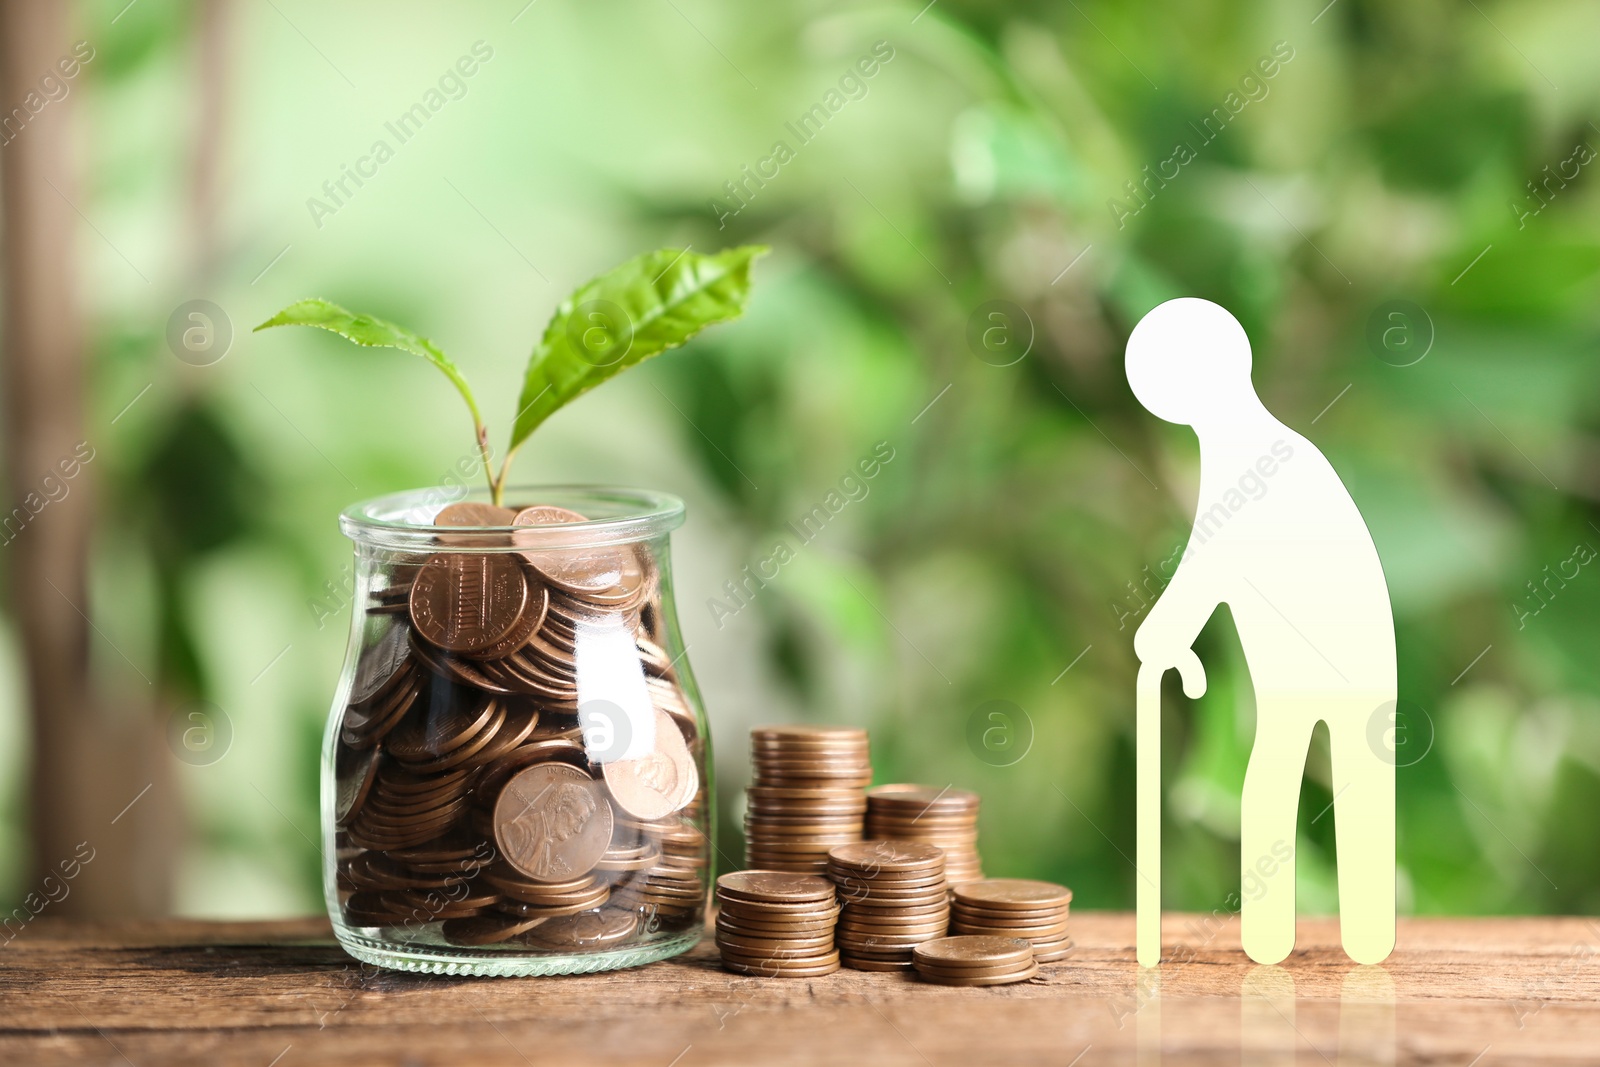 Image of Pension concept. Elderly man illustration, coins and sprout on wooden table